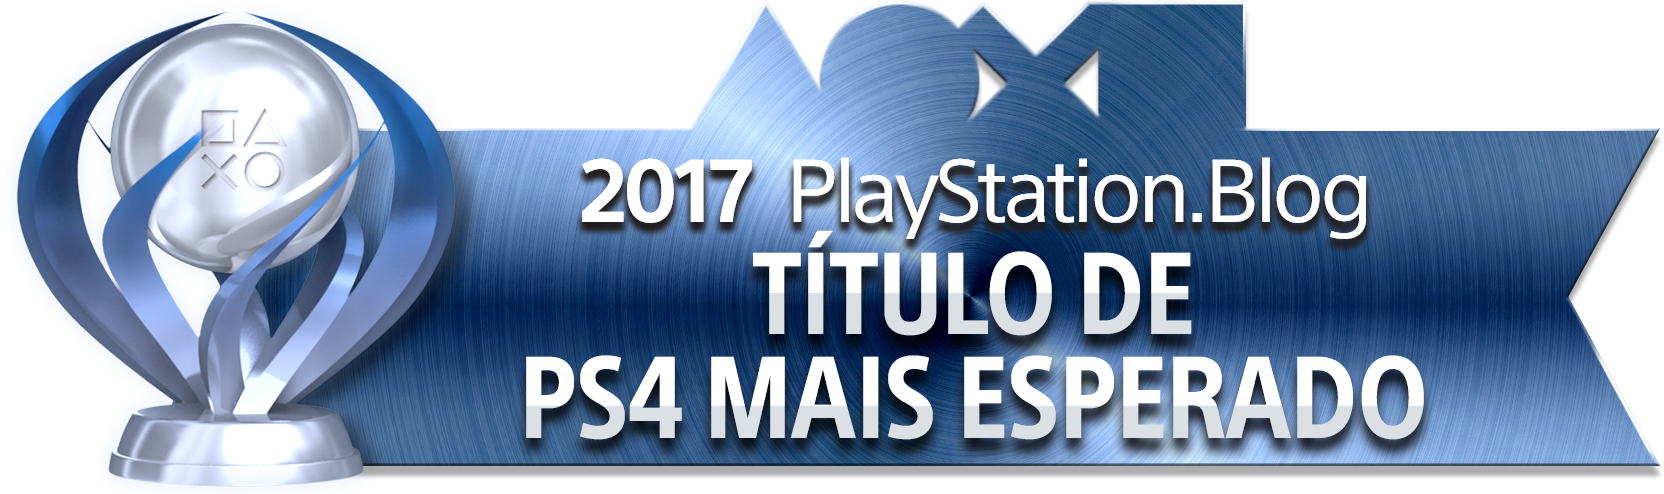 PlayStation Blog Game of the Year 2017 - Most Anticipated PS4 Title (Platinum)